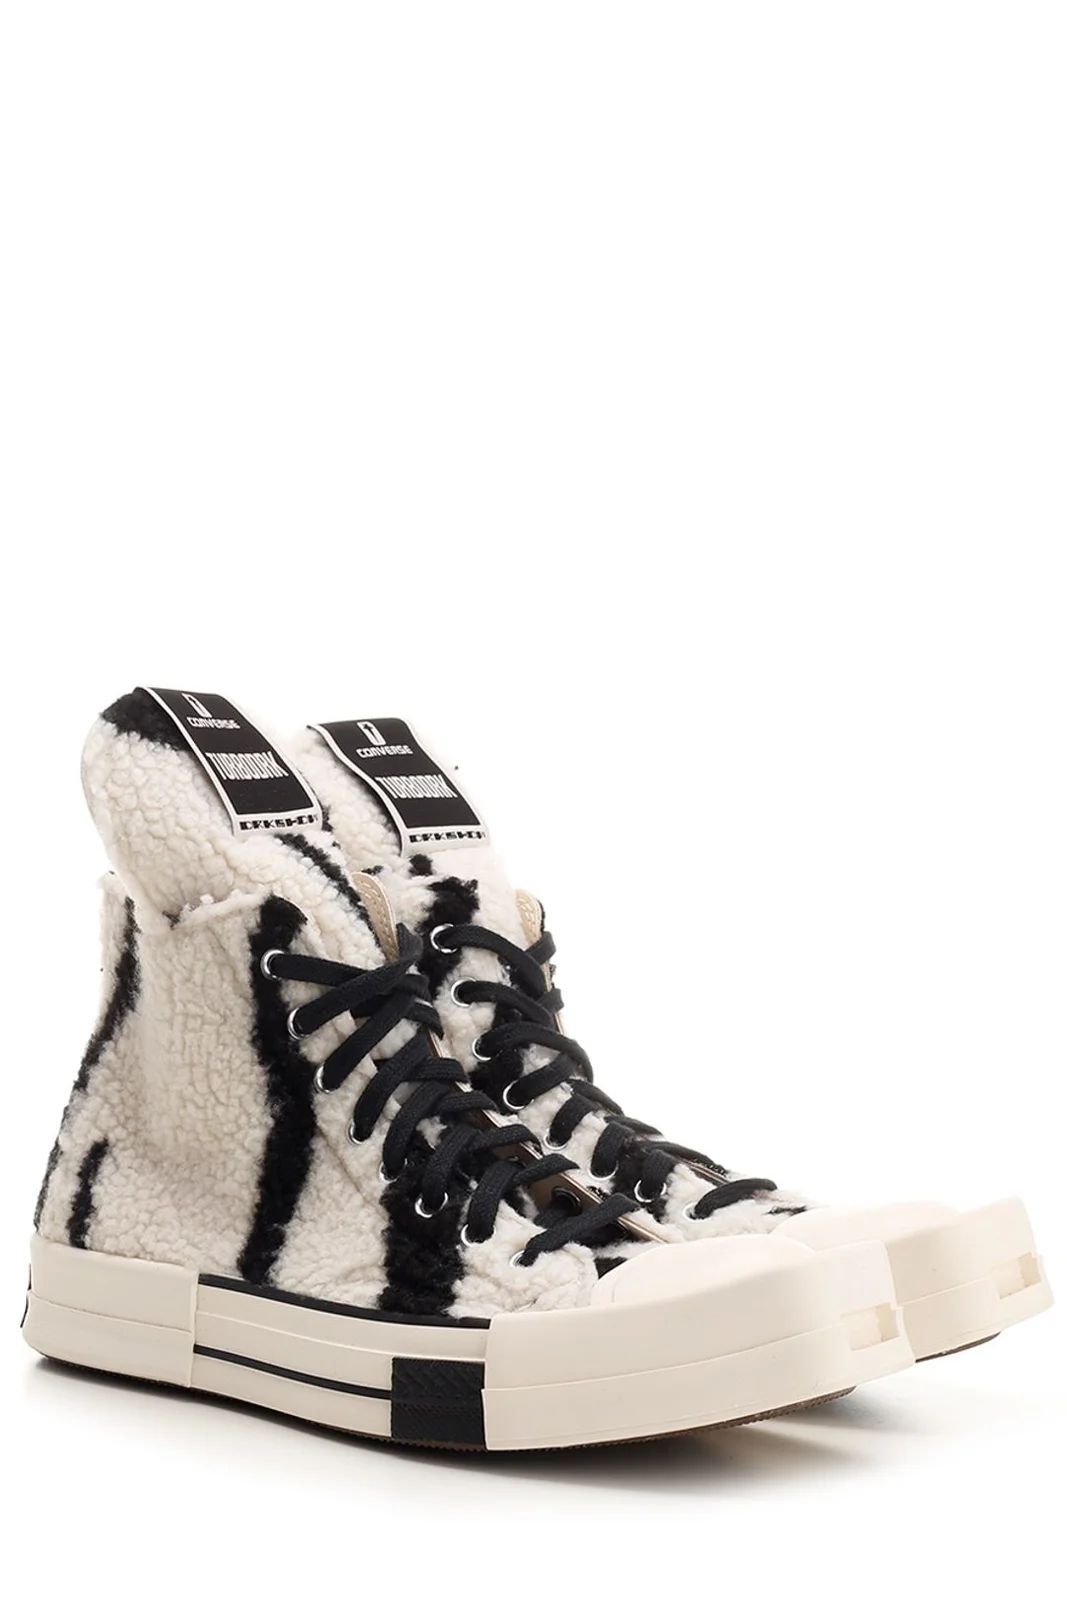 Rick Owens DRKSHDW X Converse Lace-Up Sneakers | Cettire Global